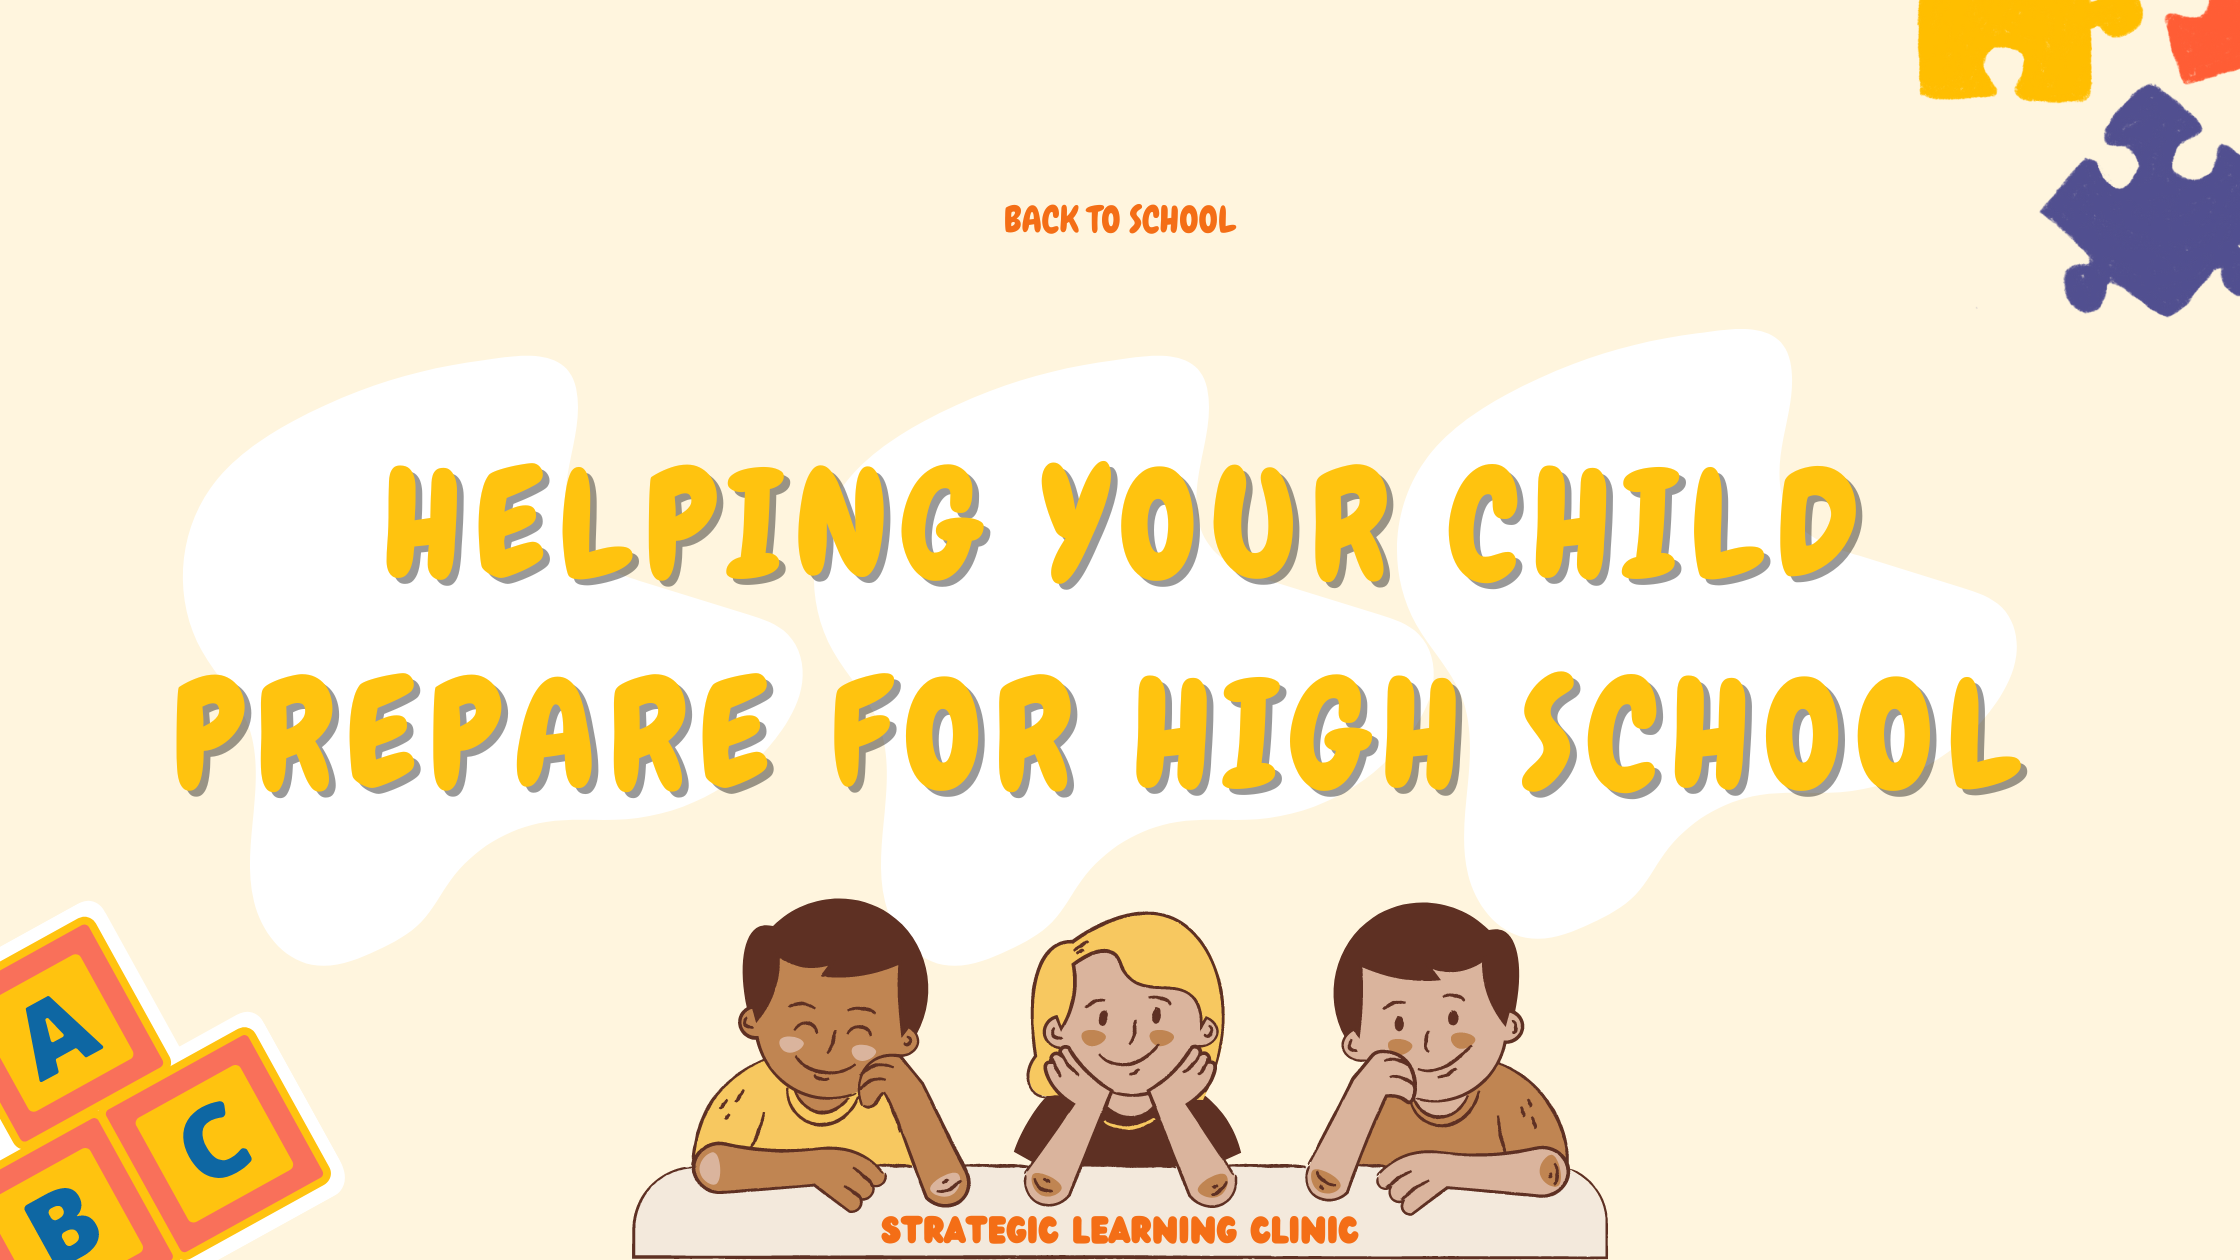 guide and help your child prepare for high school